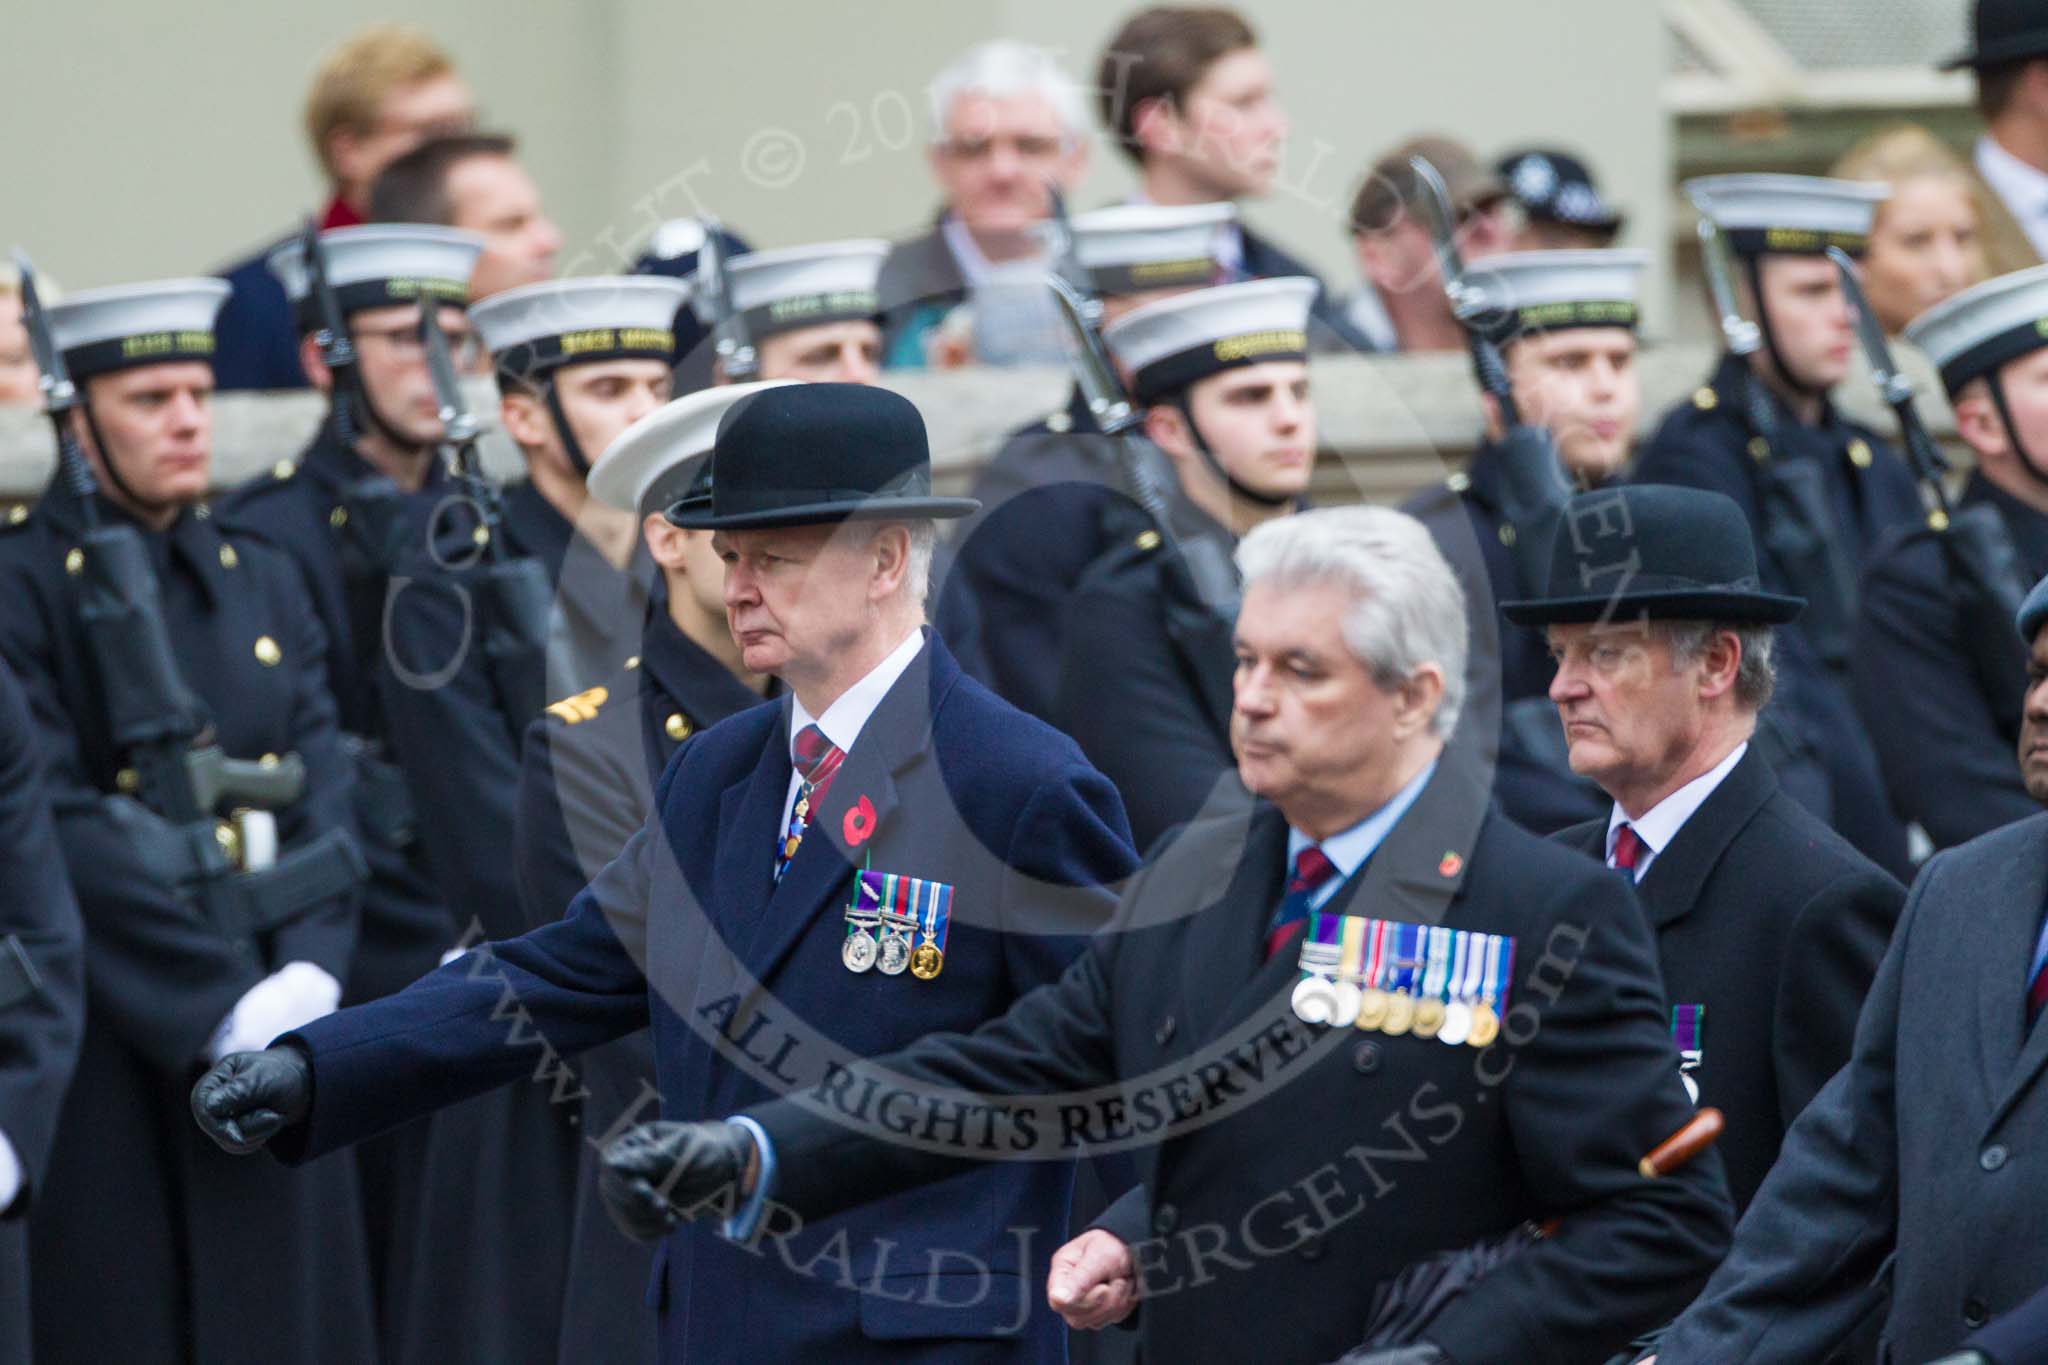 Remembrance Sunday at the Cenotaph 2015: C2, Royal Air Force Regiment Association.
Cenotaph, Whitehall, London SW1,
London,
Greater London,
United Kingdom,
on 08 November 2015 at 11:47, image #409